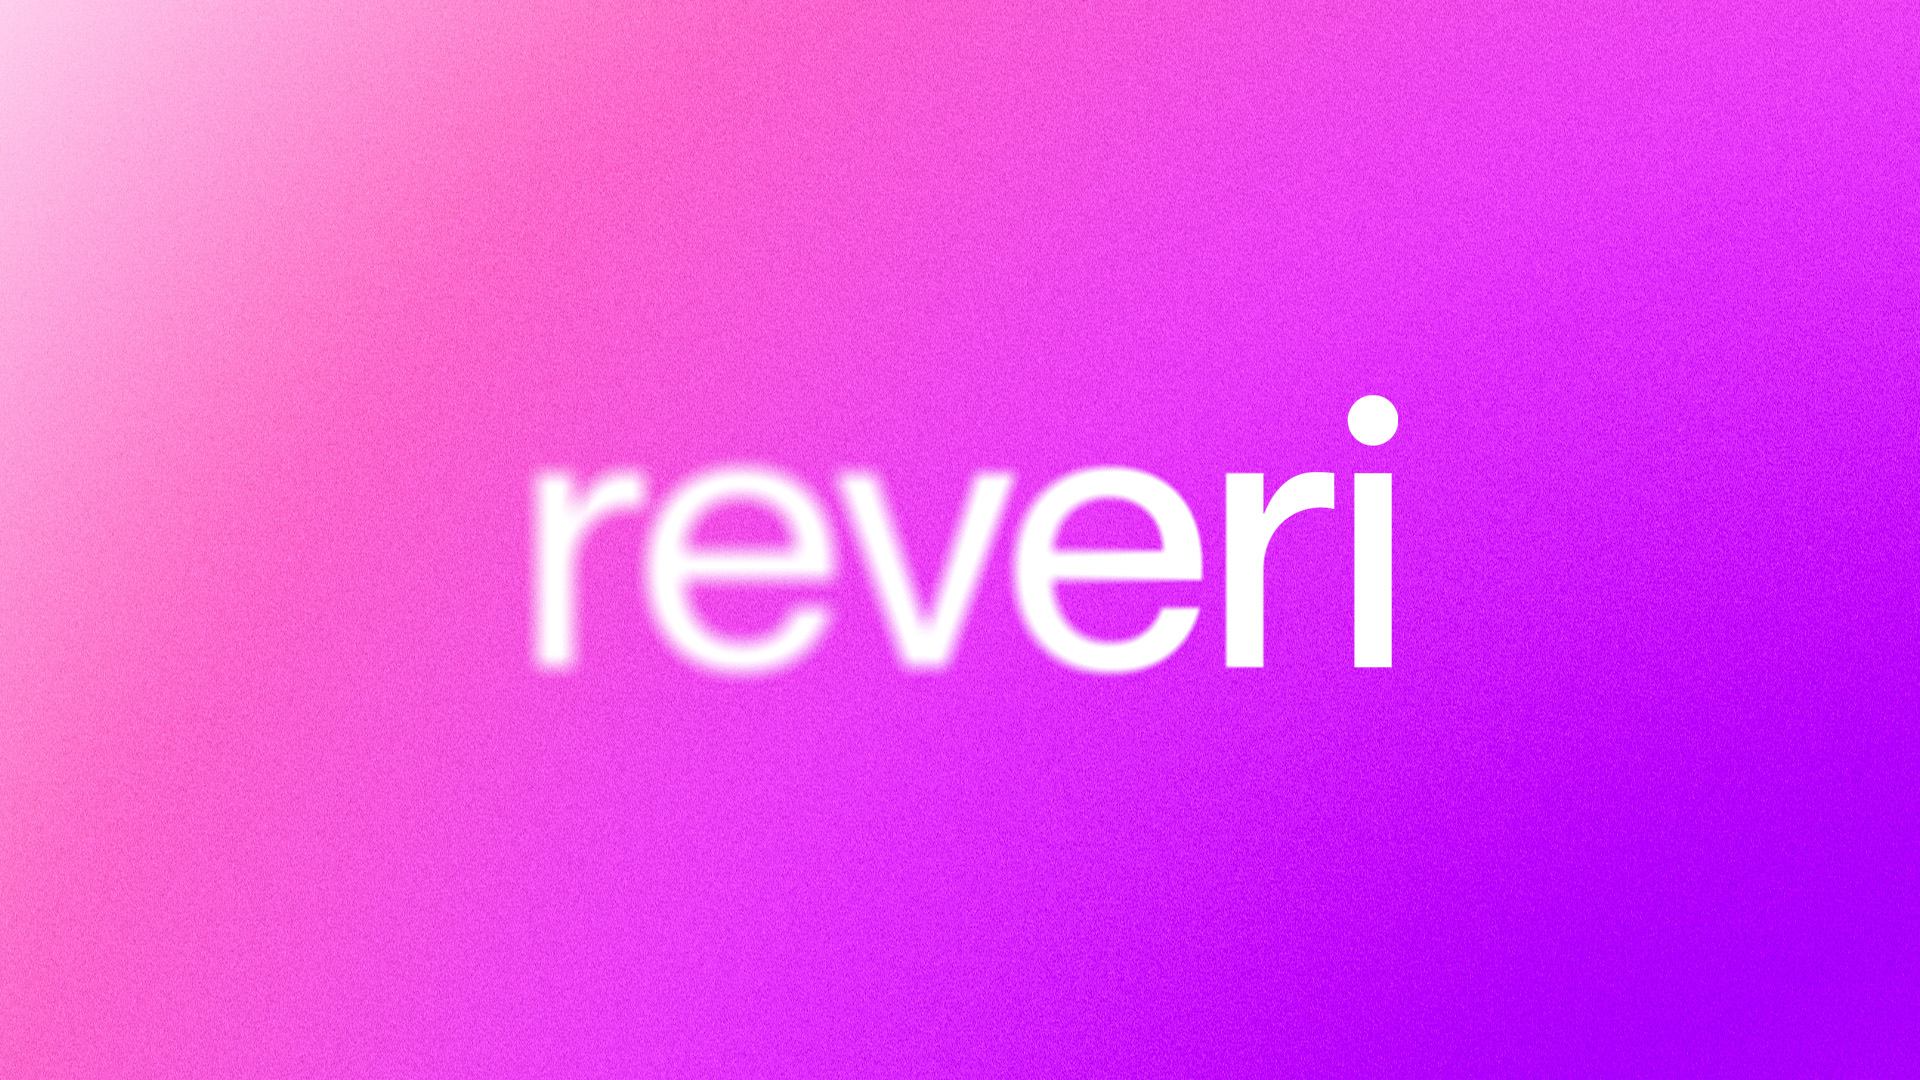 Self-hypnosis App Reveri Launches Major Rebrand by Mother Design to Mark Its Global Growth Ambitions